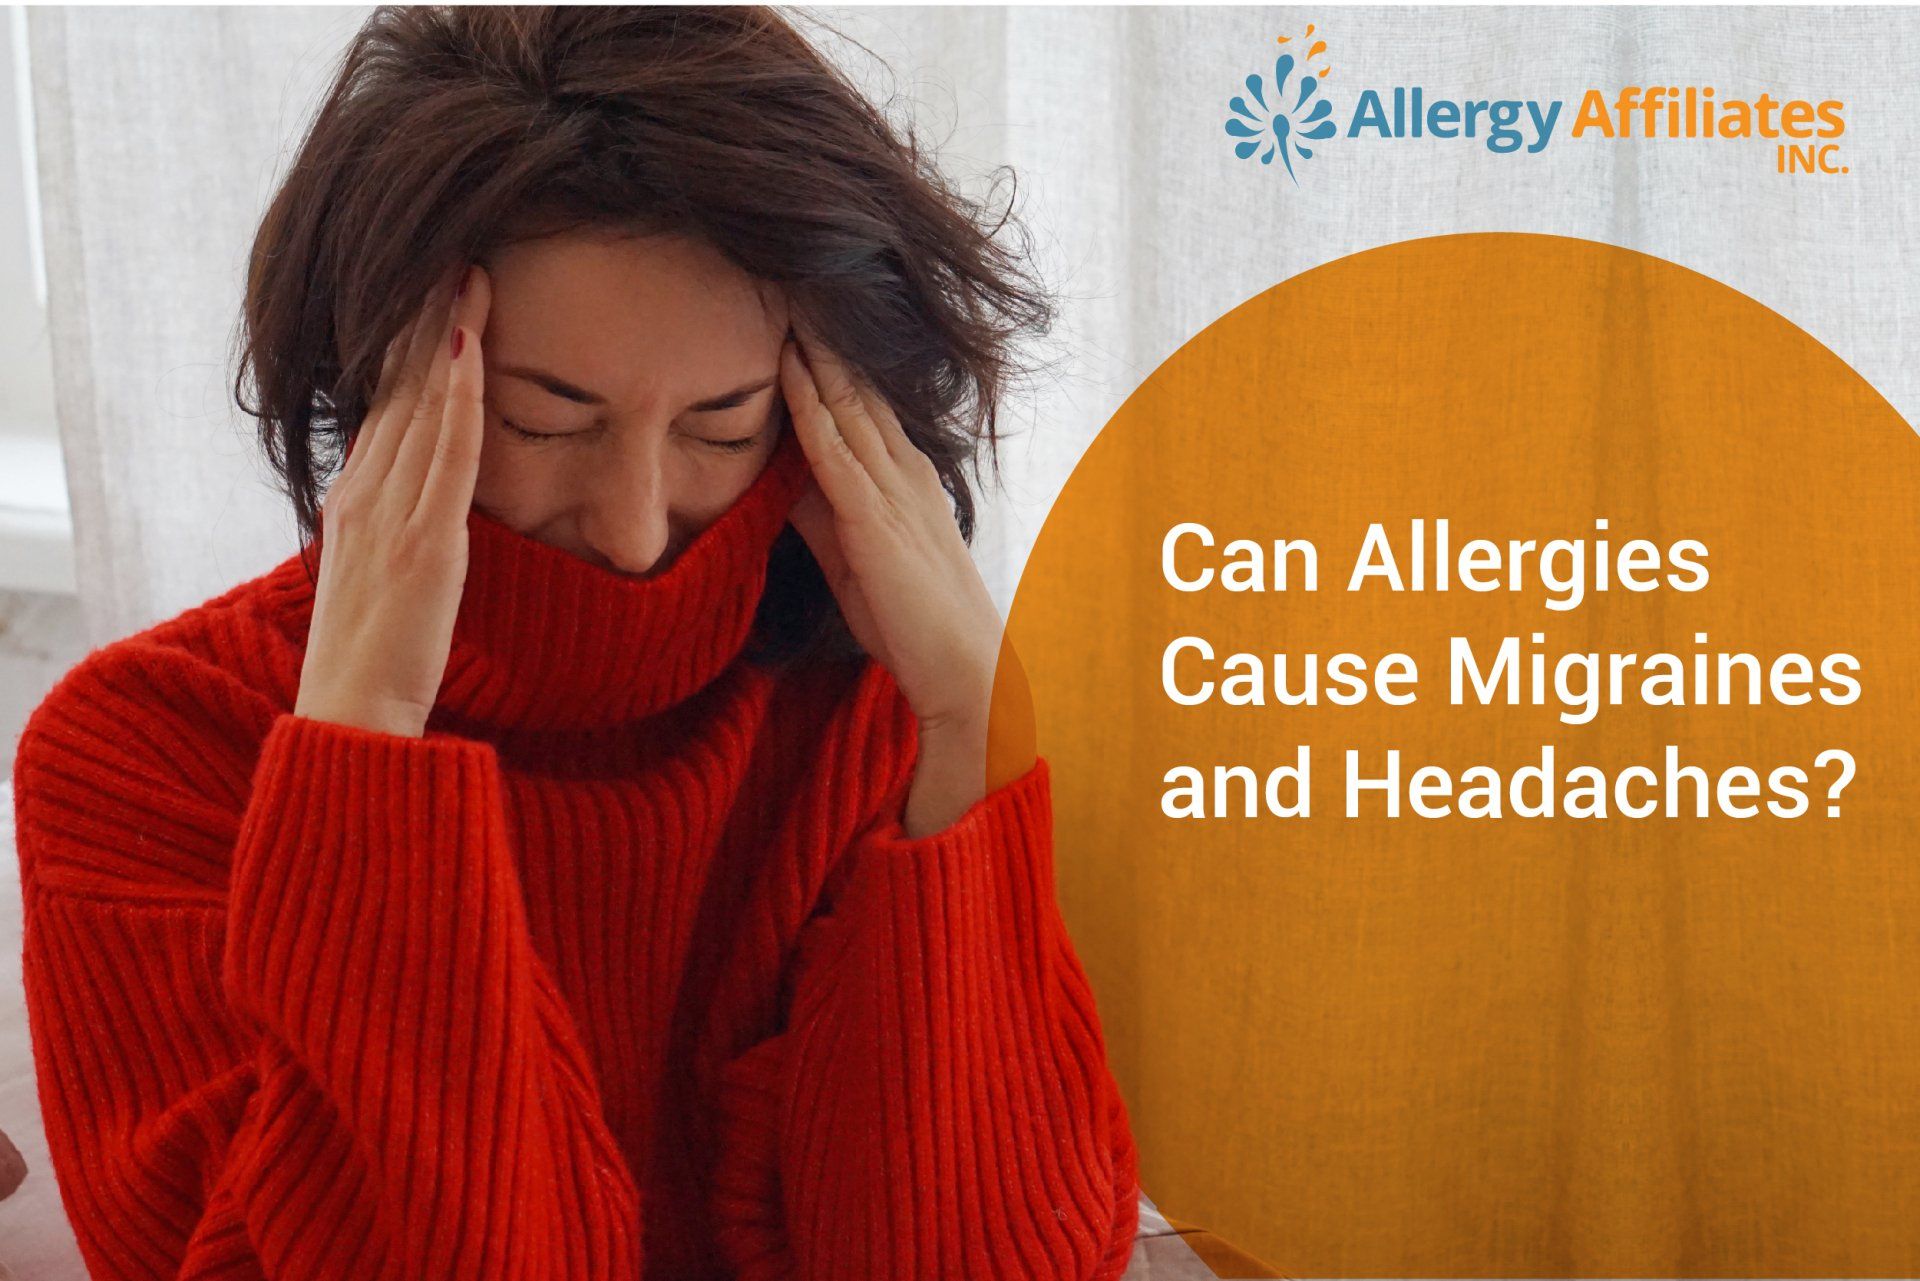 Can Allergies Cause Migraines and Headaches?